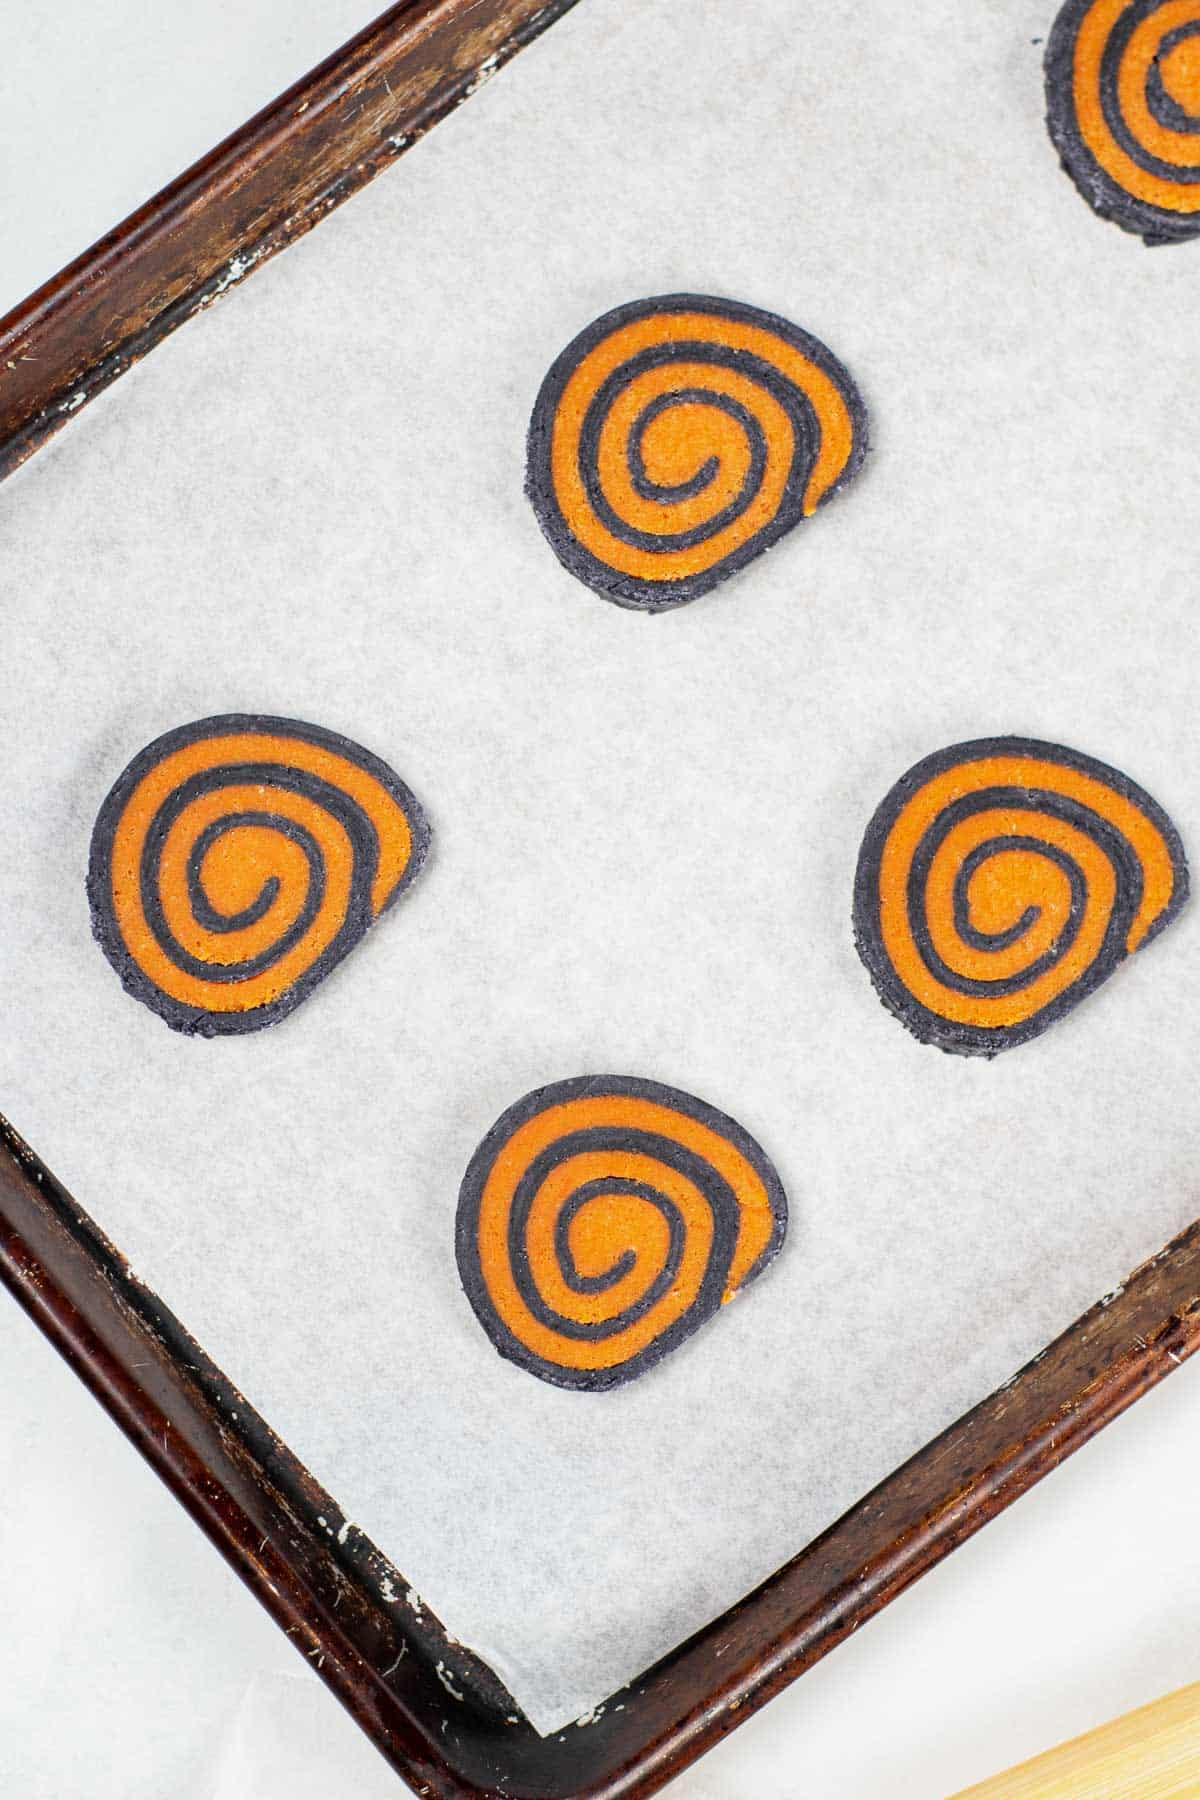 five uncooked slices of black and orange pinwheel cookies in a cookie sheet lined with parchment paper.